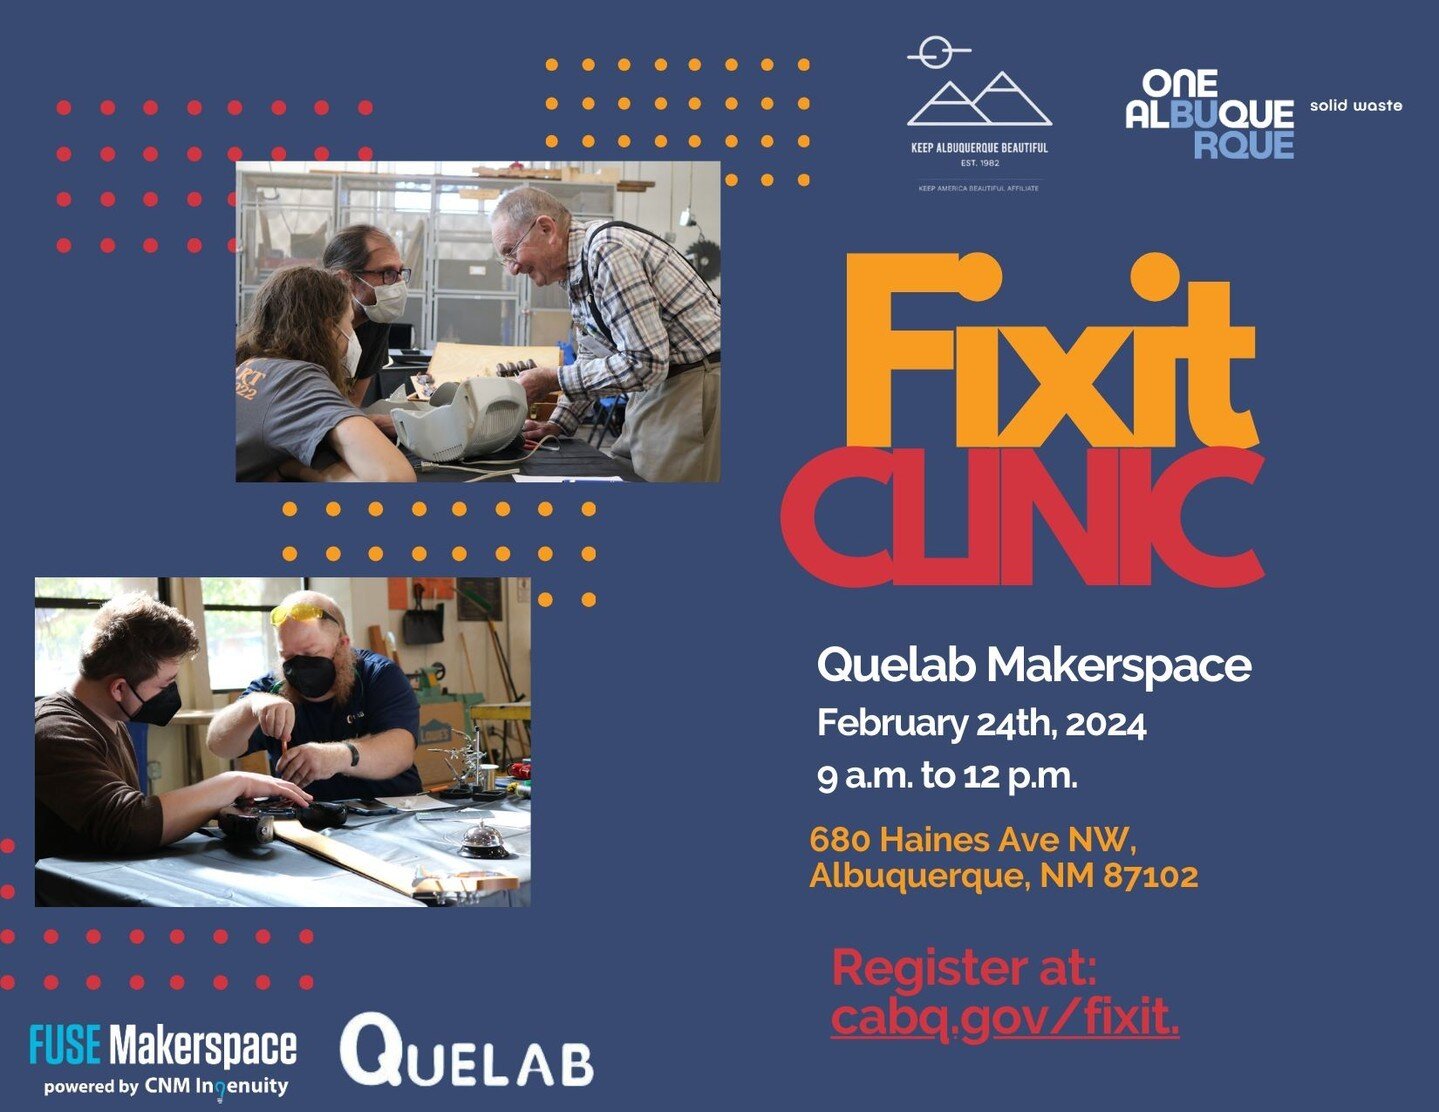 Don't throw it away, bring your broken items to our Fixit Clinic! 🔧 🛠️ Our expert coaches will guide you through the repair process. Don't miss out, register by February 9th to secure your spot!
.
.
.
#OneAlbuquerque #KeepABQBeautiful #FixitClinic